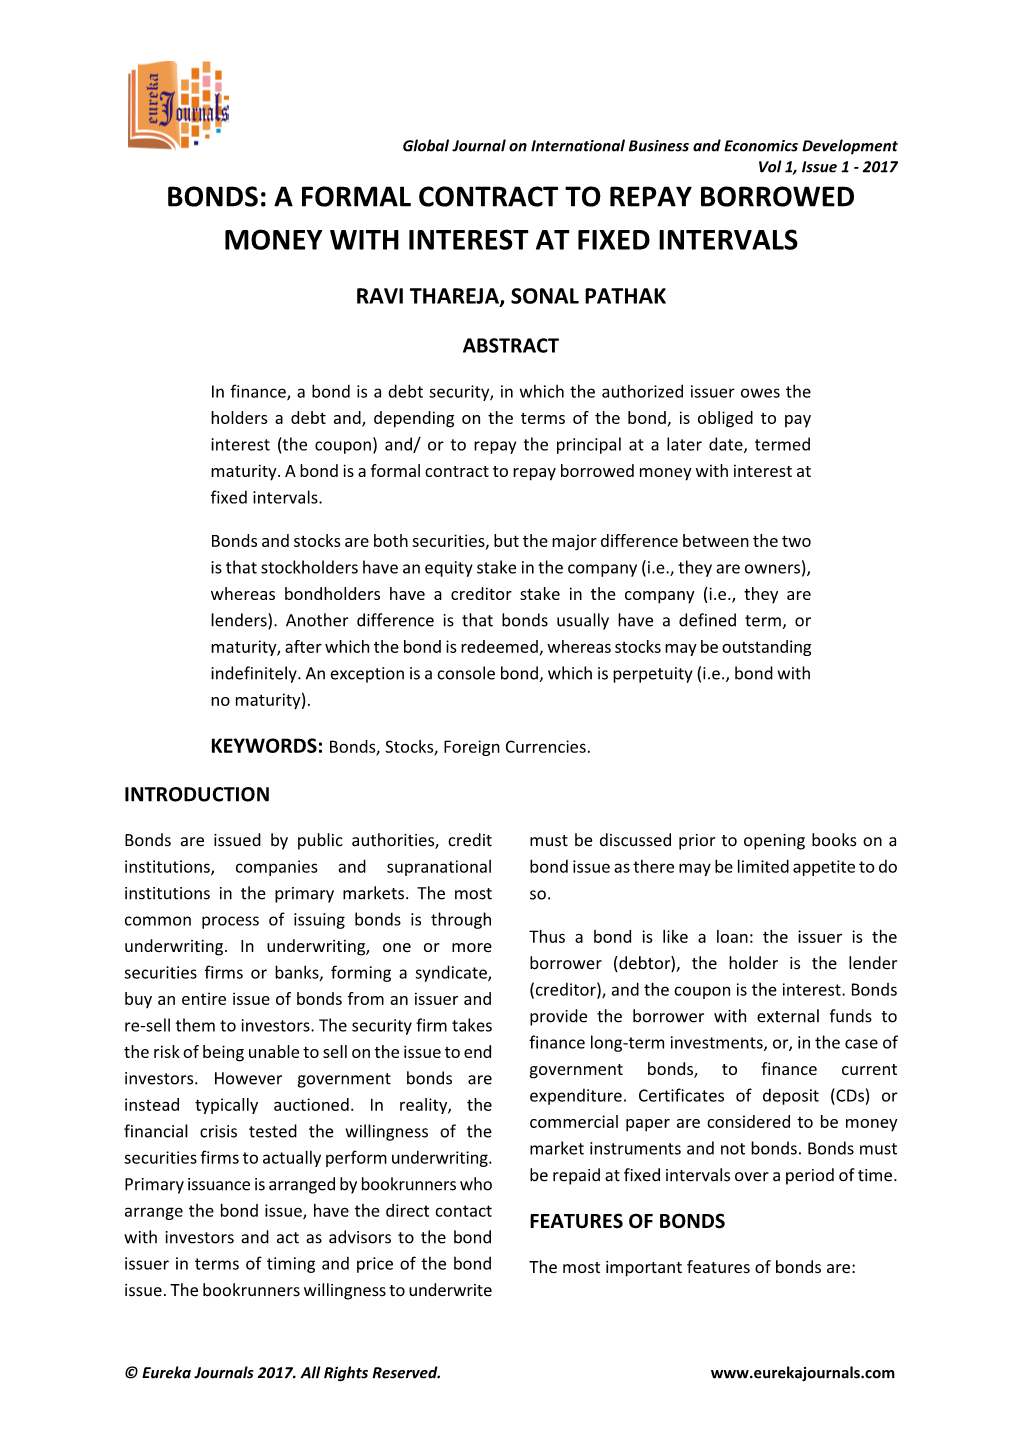 BONDS-A Formal Contract to Repay Borrowed Money